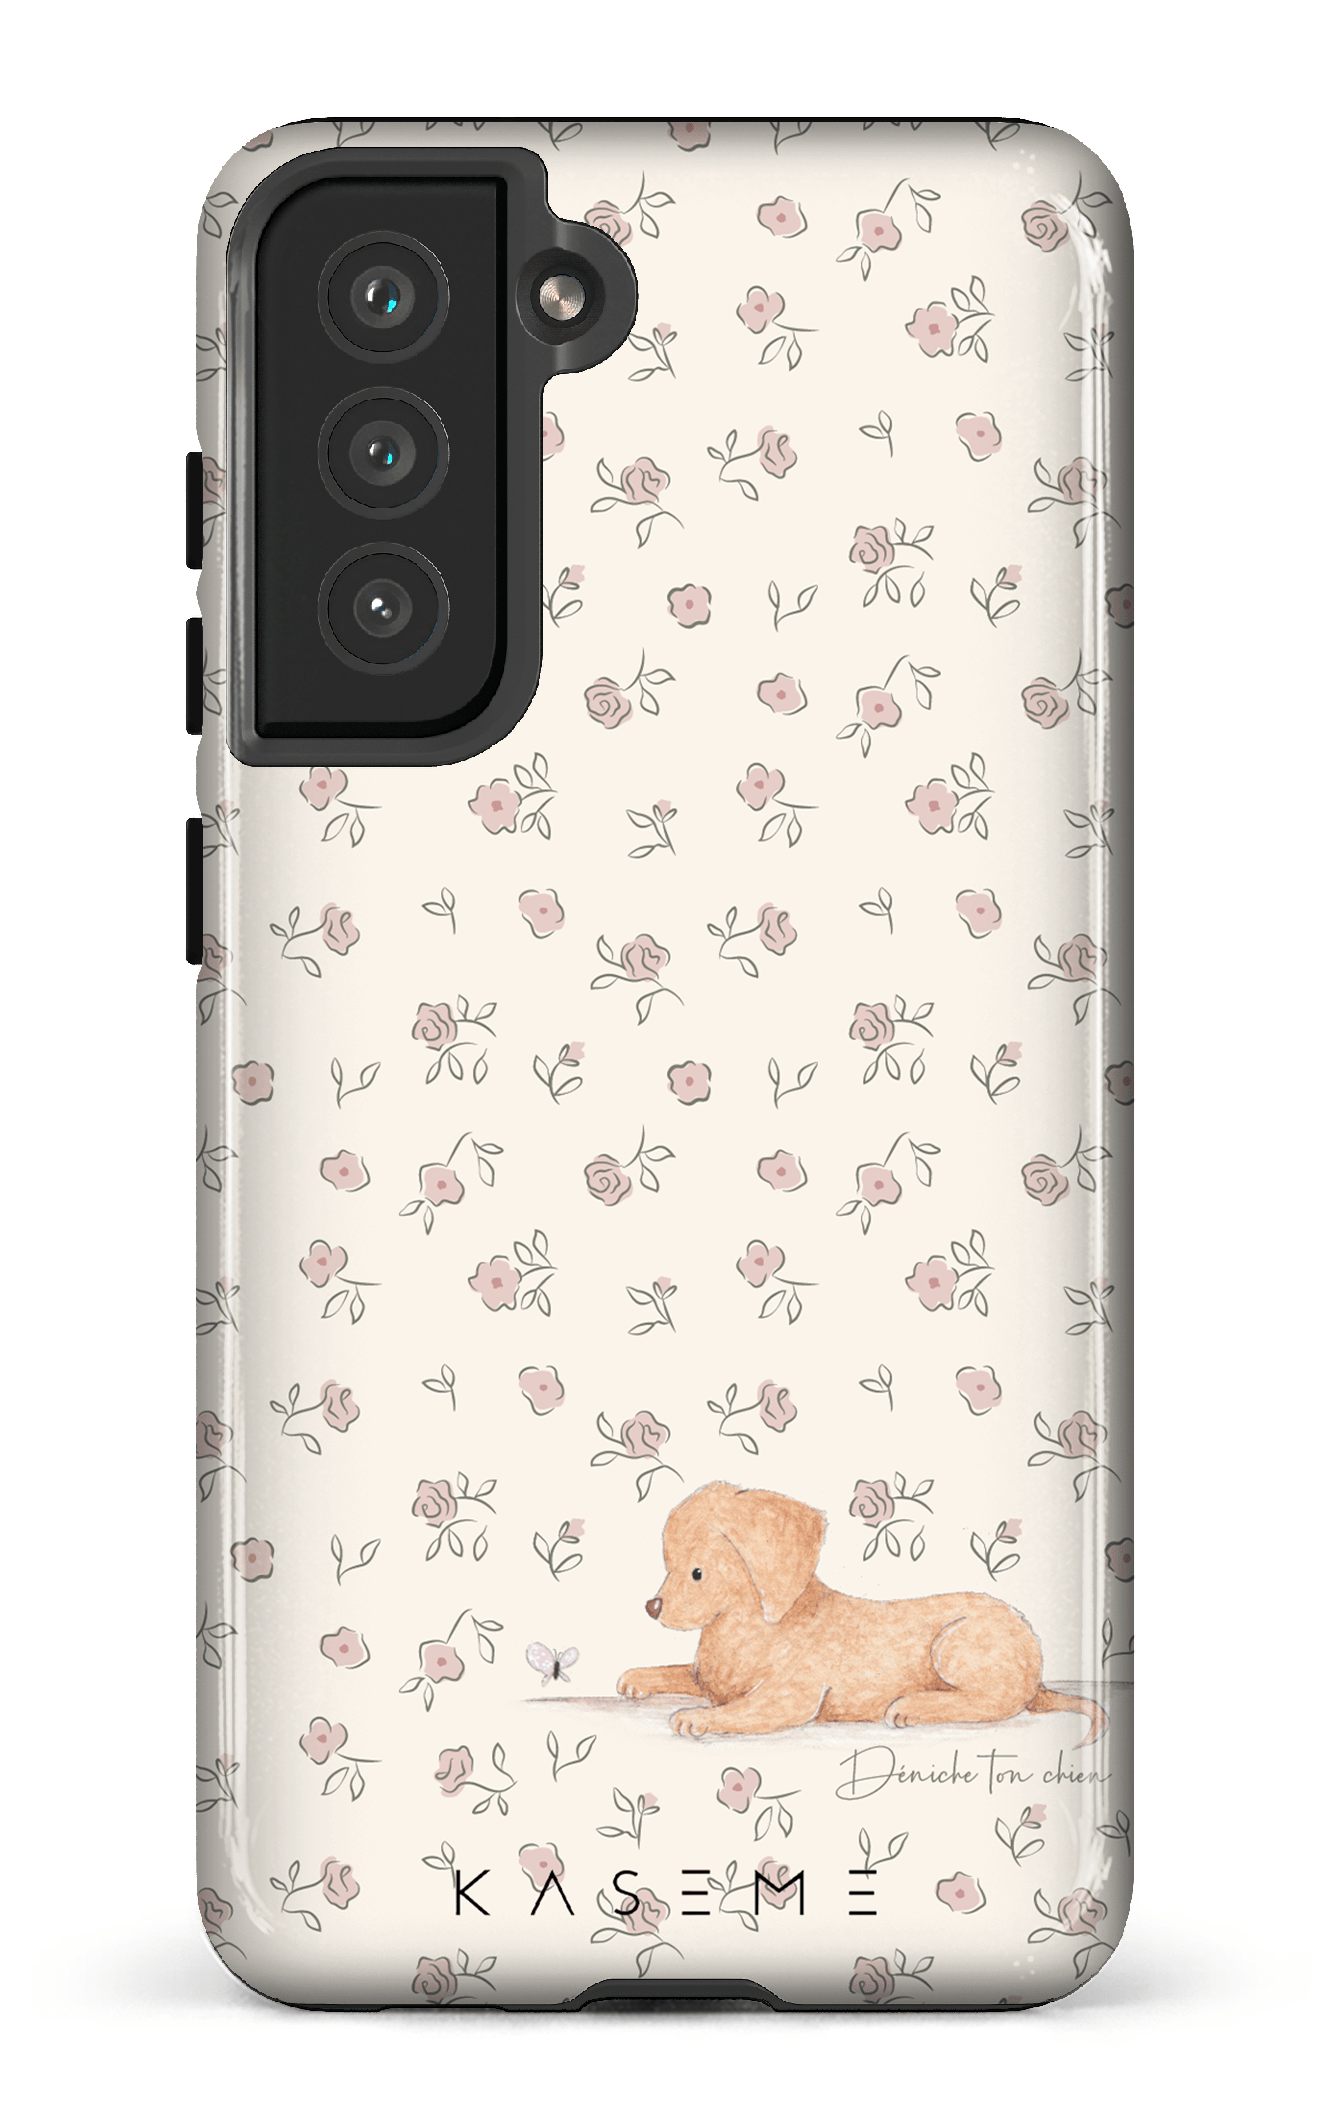 Fur-Ever A Dog Lover Pink by Déniche Ton Chien - Galaxy S21 FE